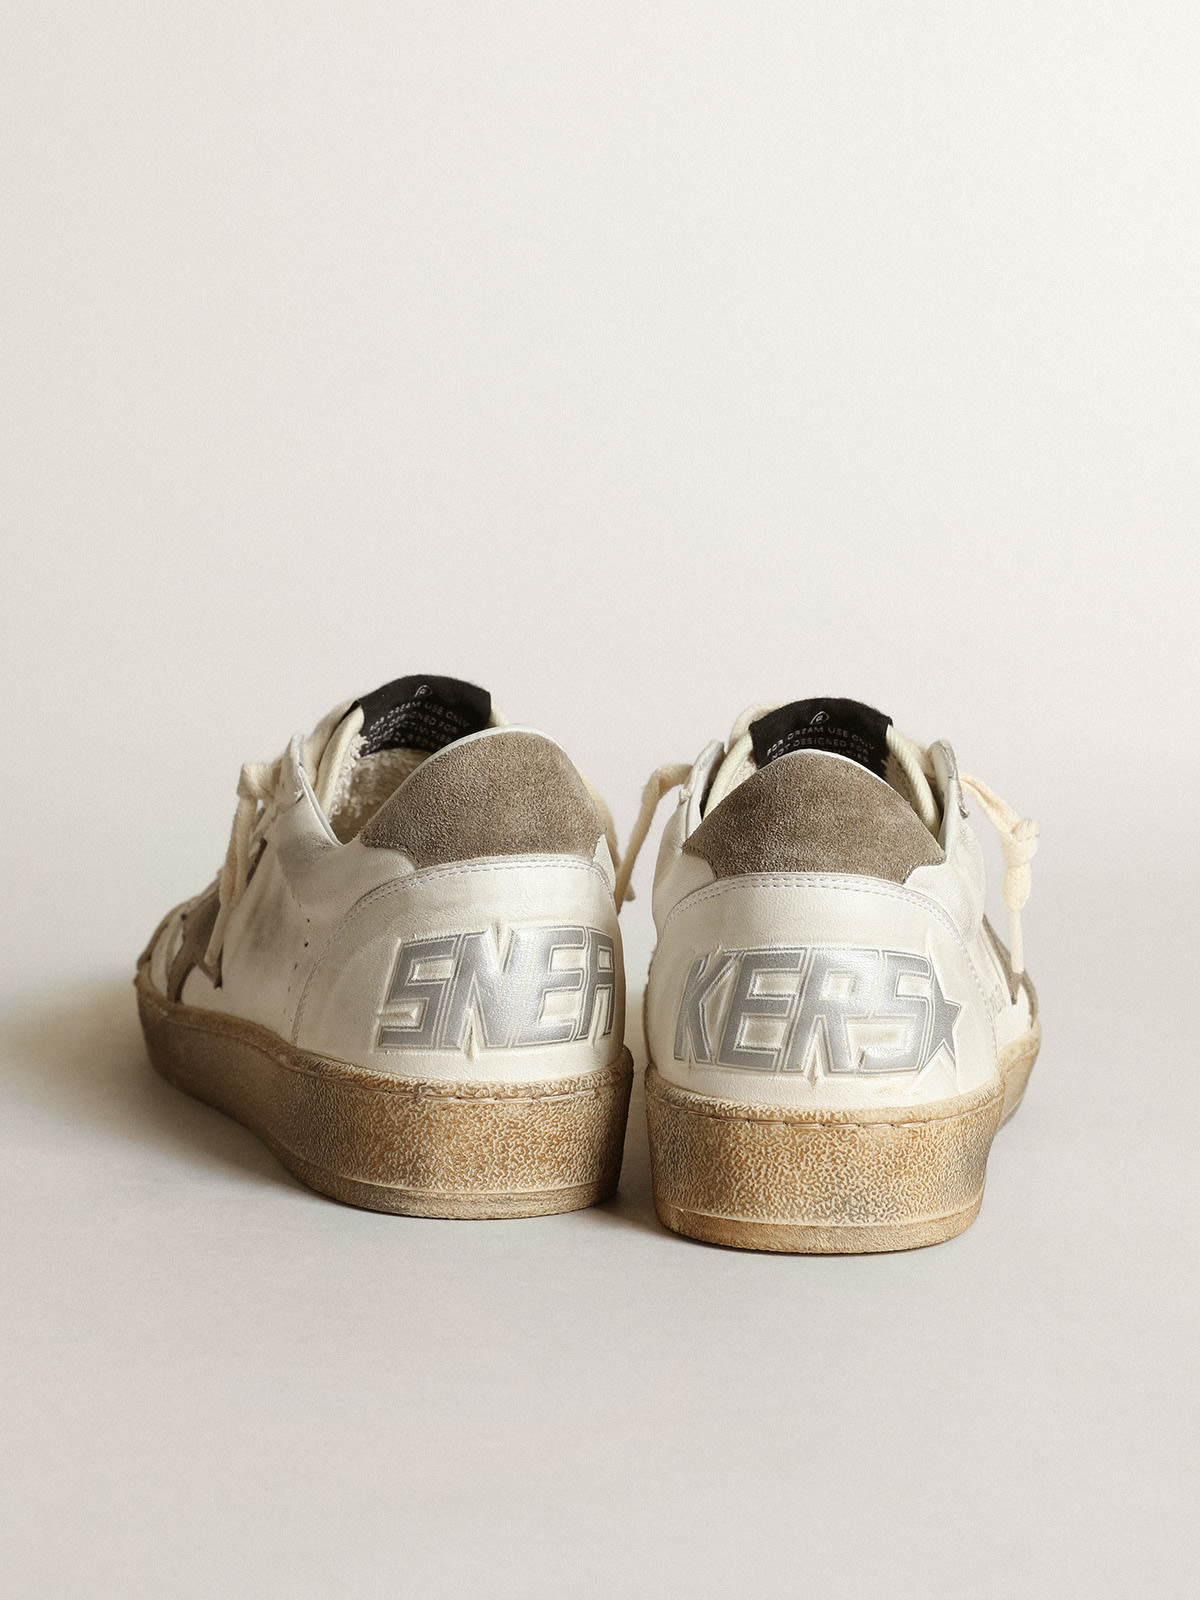 Golden Goose - White women’s Ball Star LTD with a dove gray star and heel tab in 